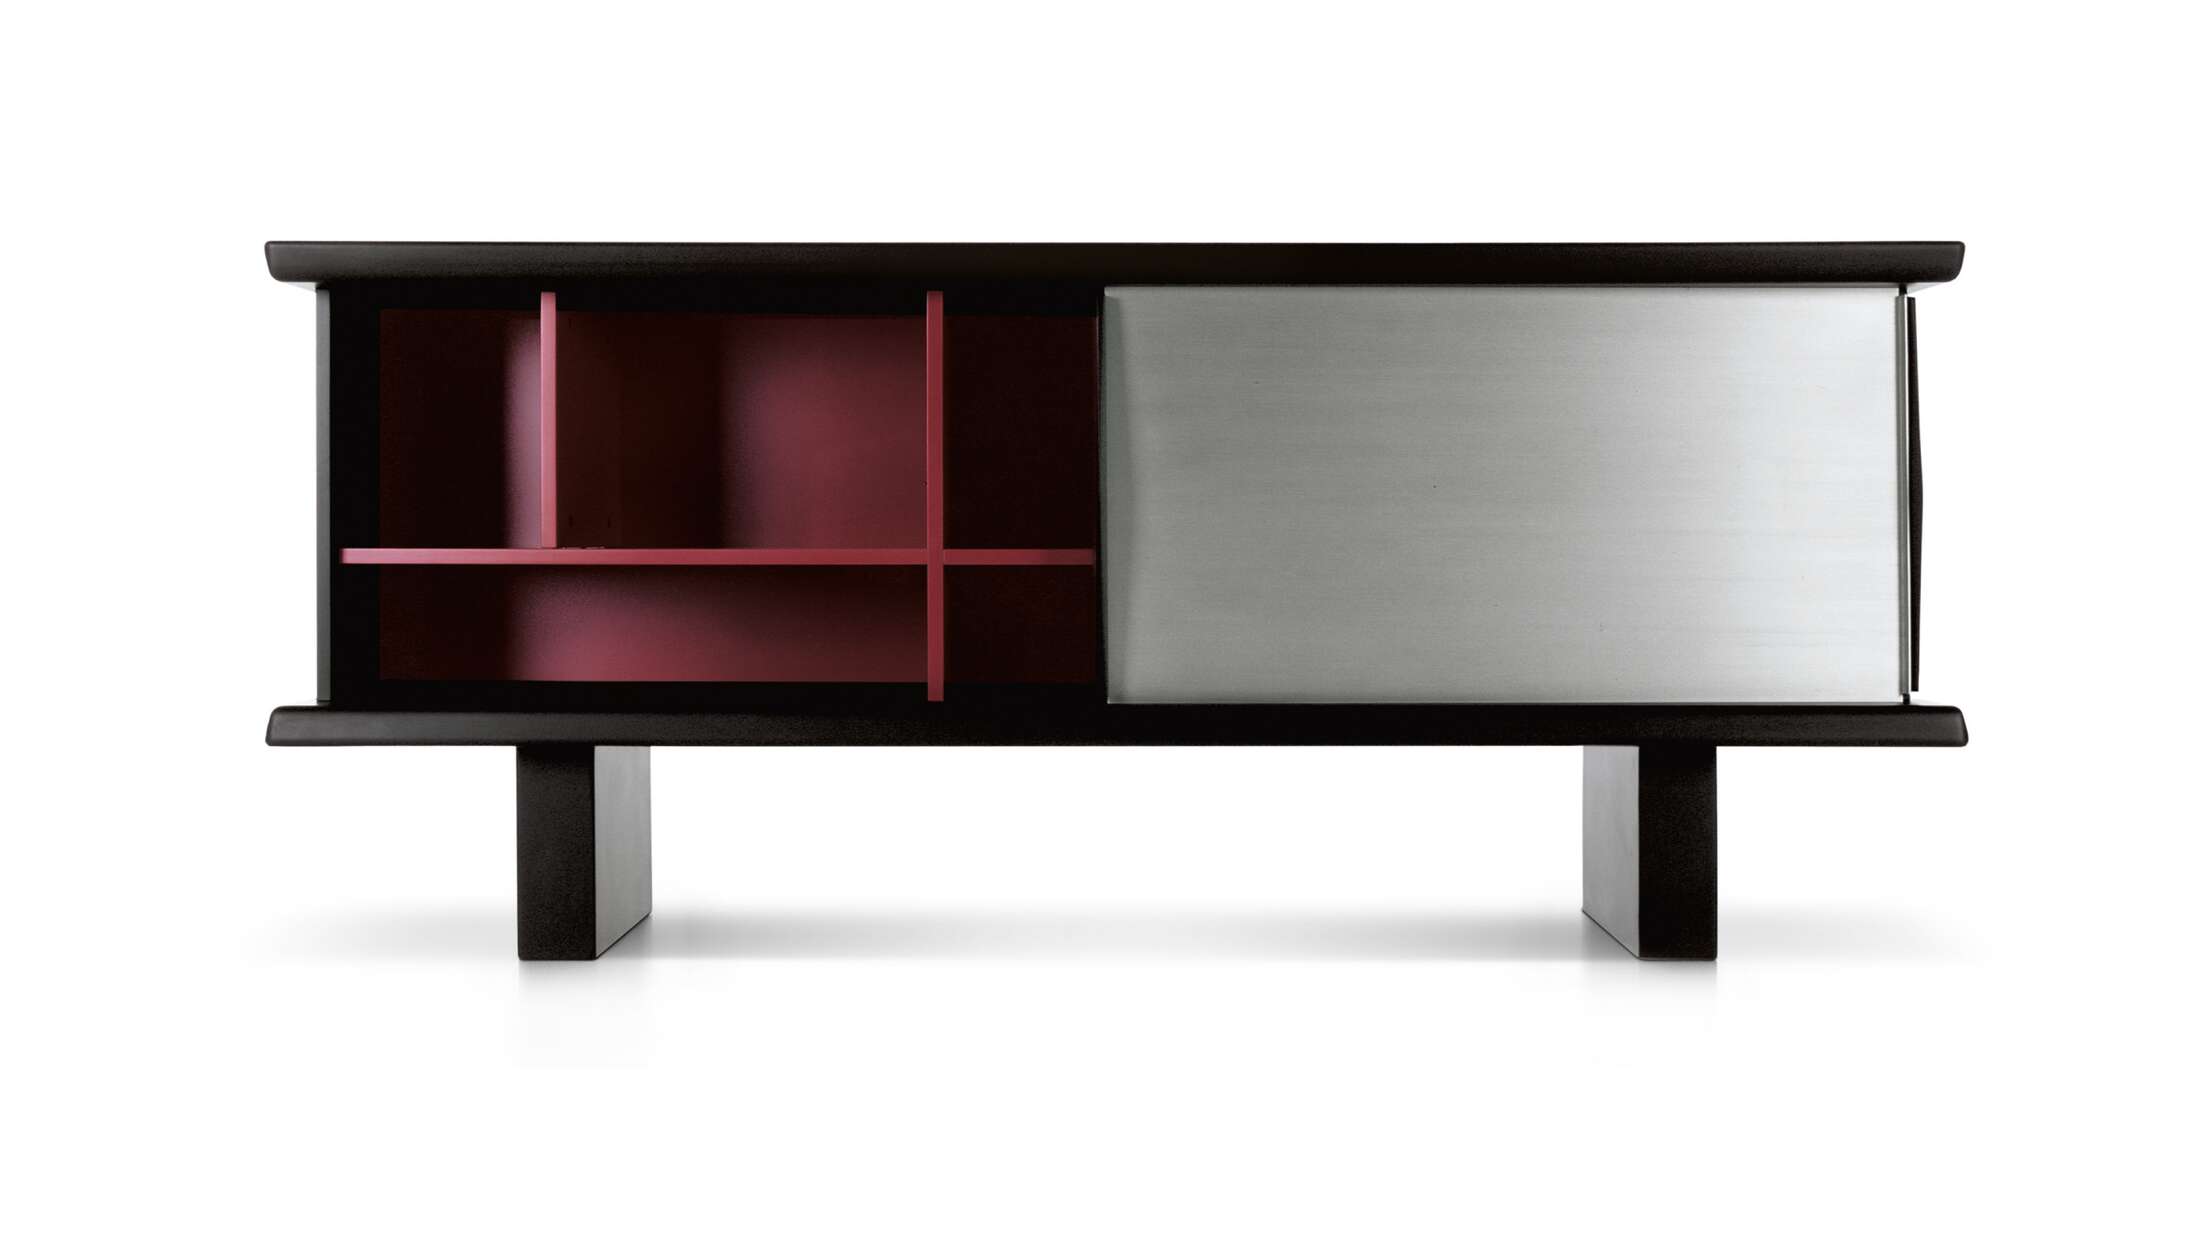 Prices vary dependent on the material/finish. Available in anodized aluminum, black painted anodized aluminum and mahogany. The price given applies to the piece as shown in the first picture. 

The Riflesso storage unit, created in 1958 by Charlotte